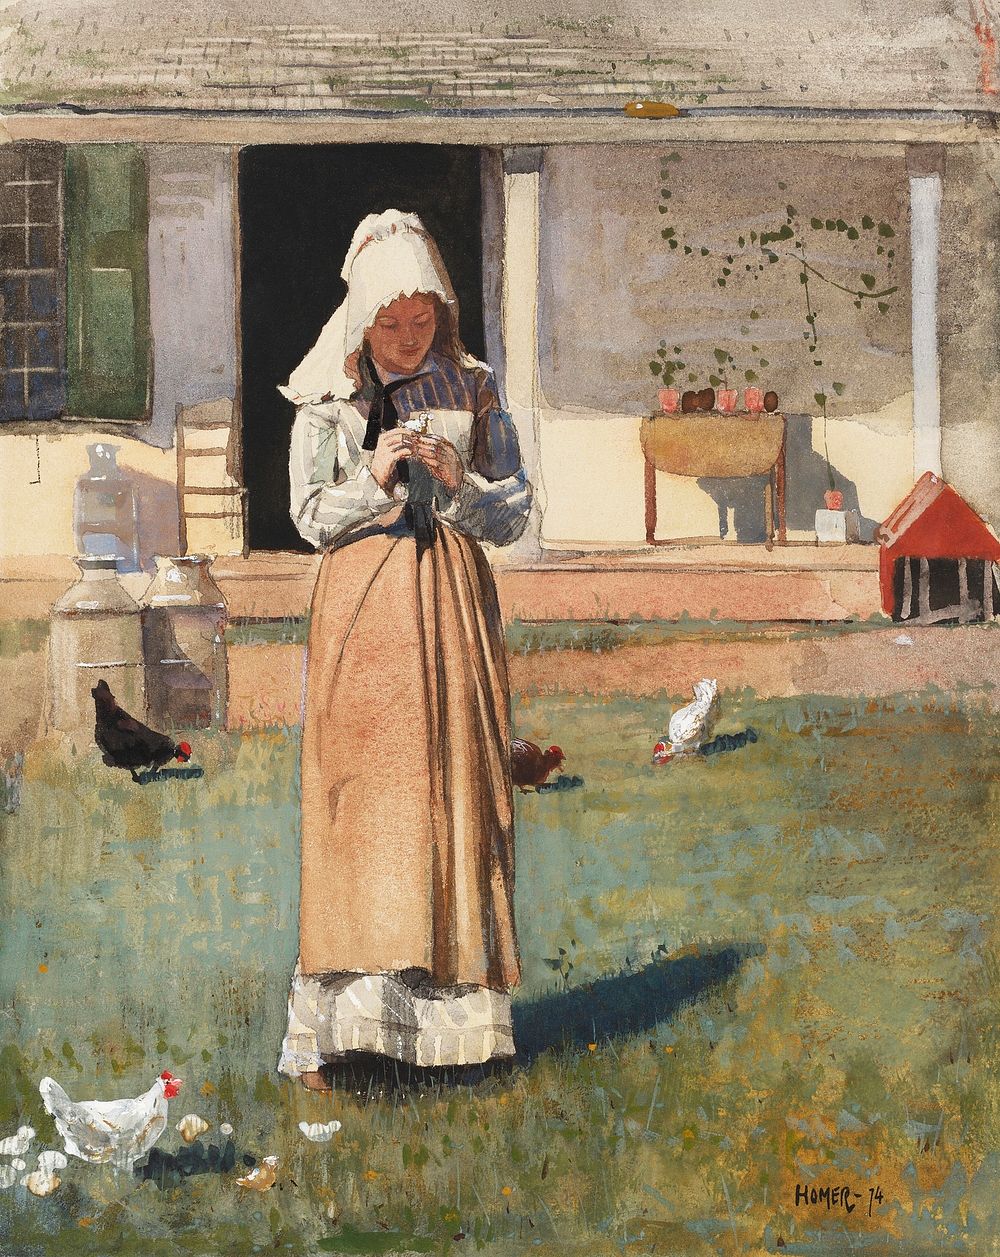 A Sick Chicken (1874) by Winslow Homer. Original from The National Gallery of Art. Digitally enhanced by rawpixel.